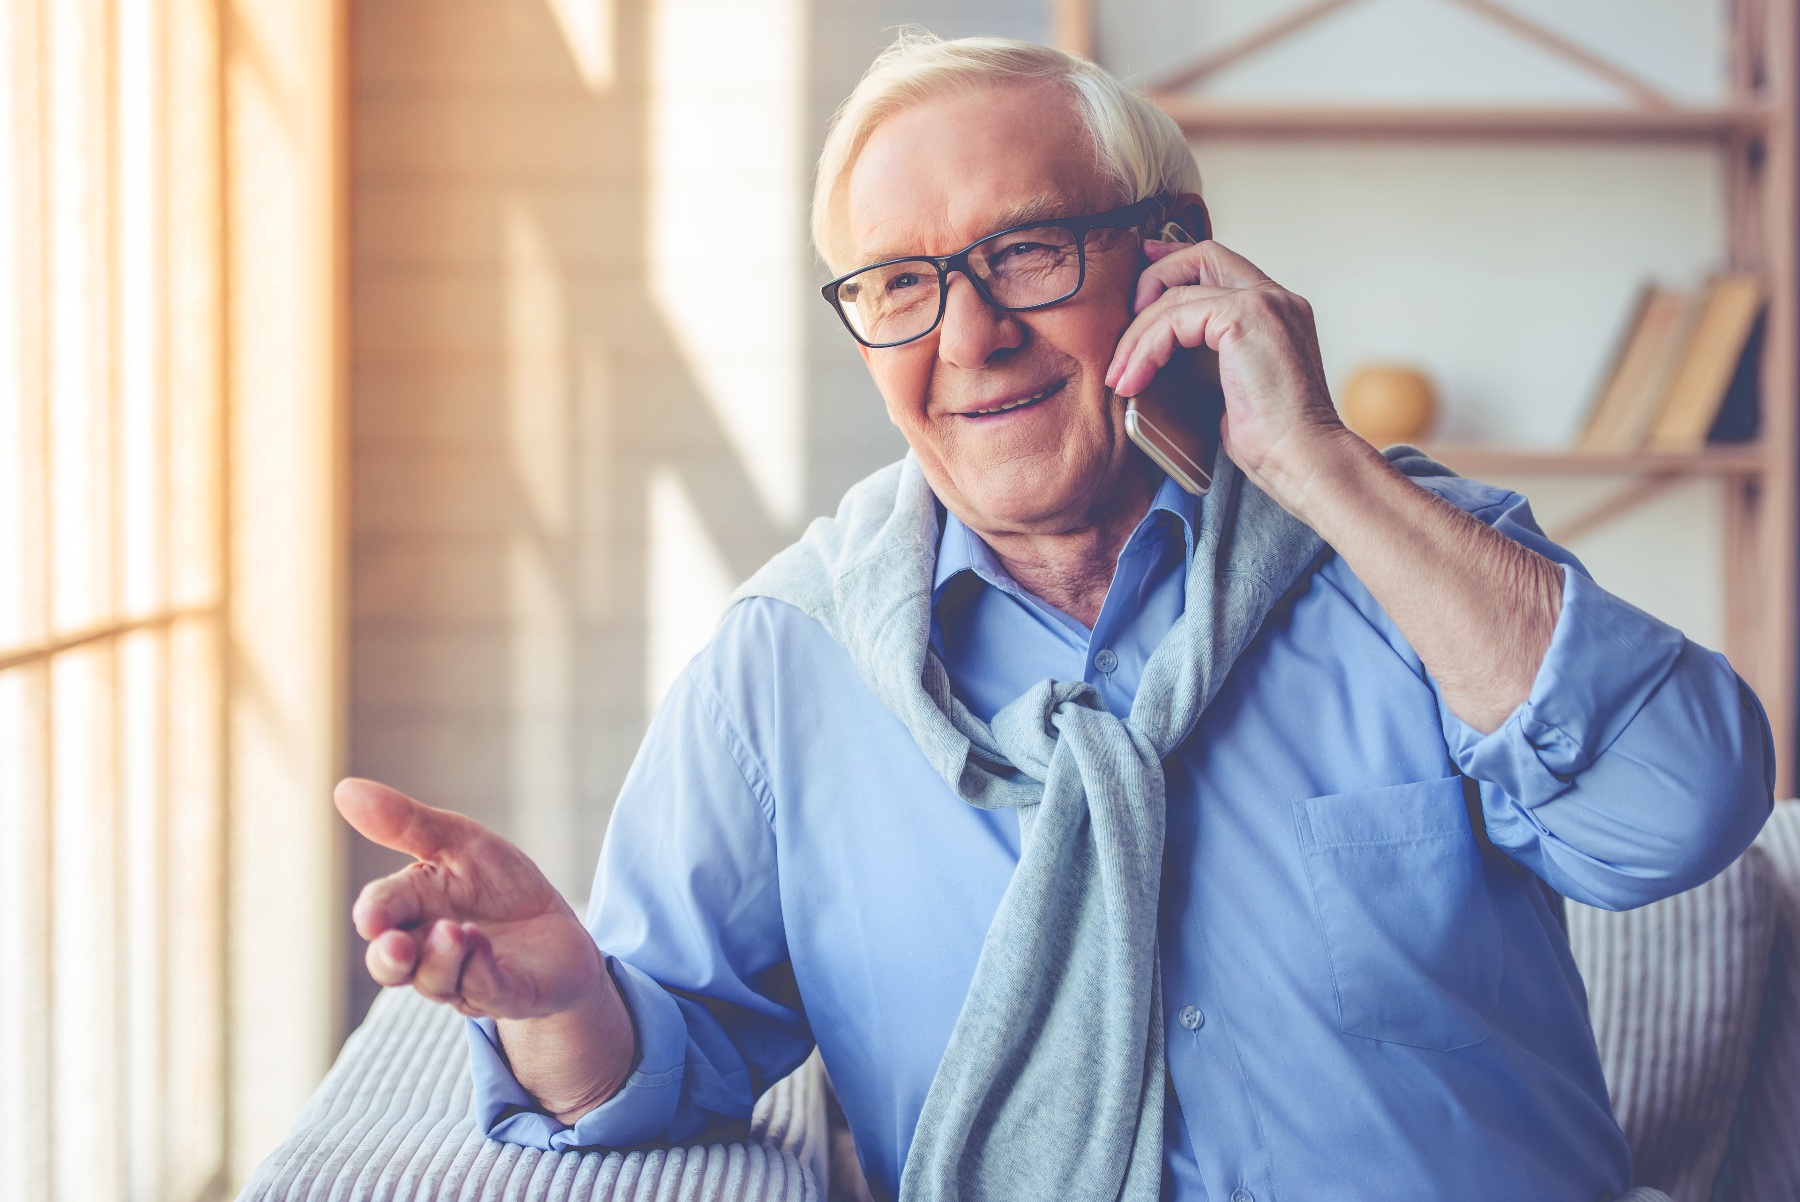 stock photo of a smiling middle aged man talking on a mobile phone